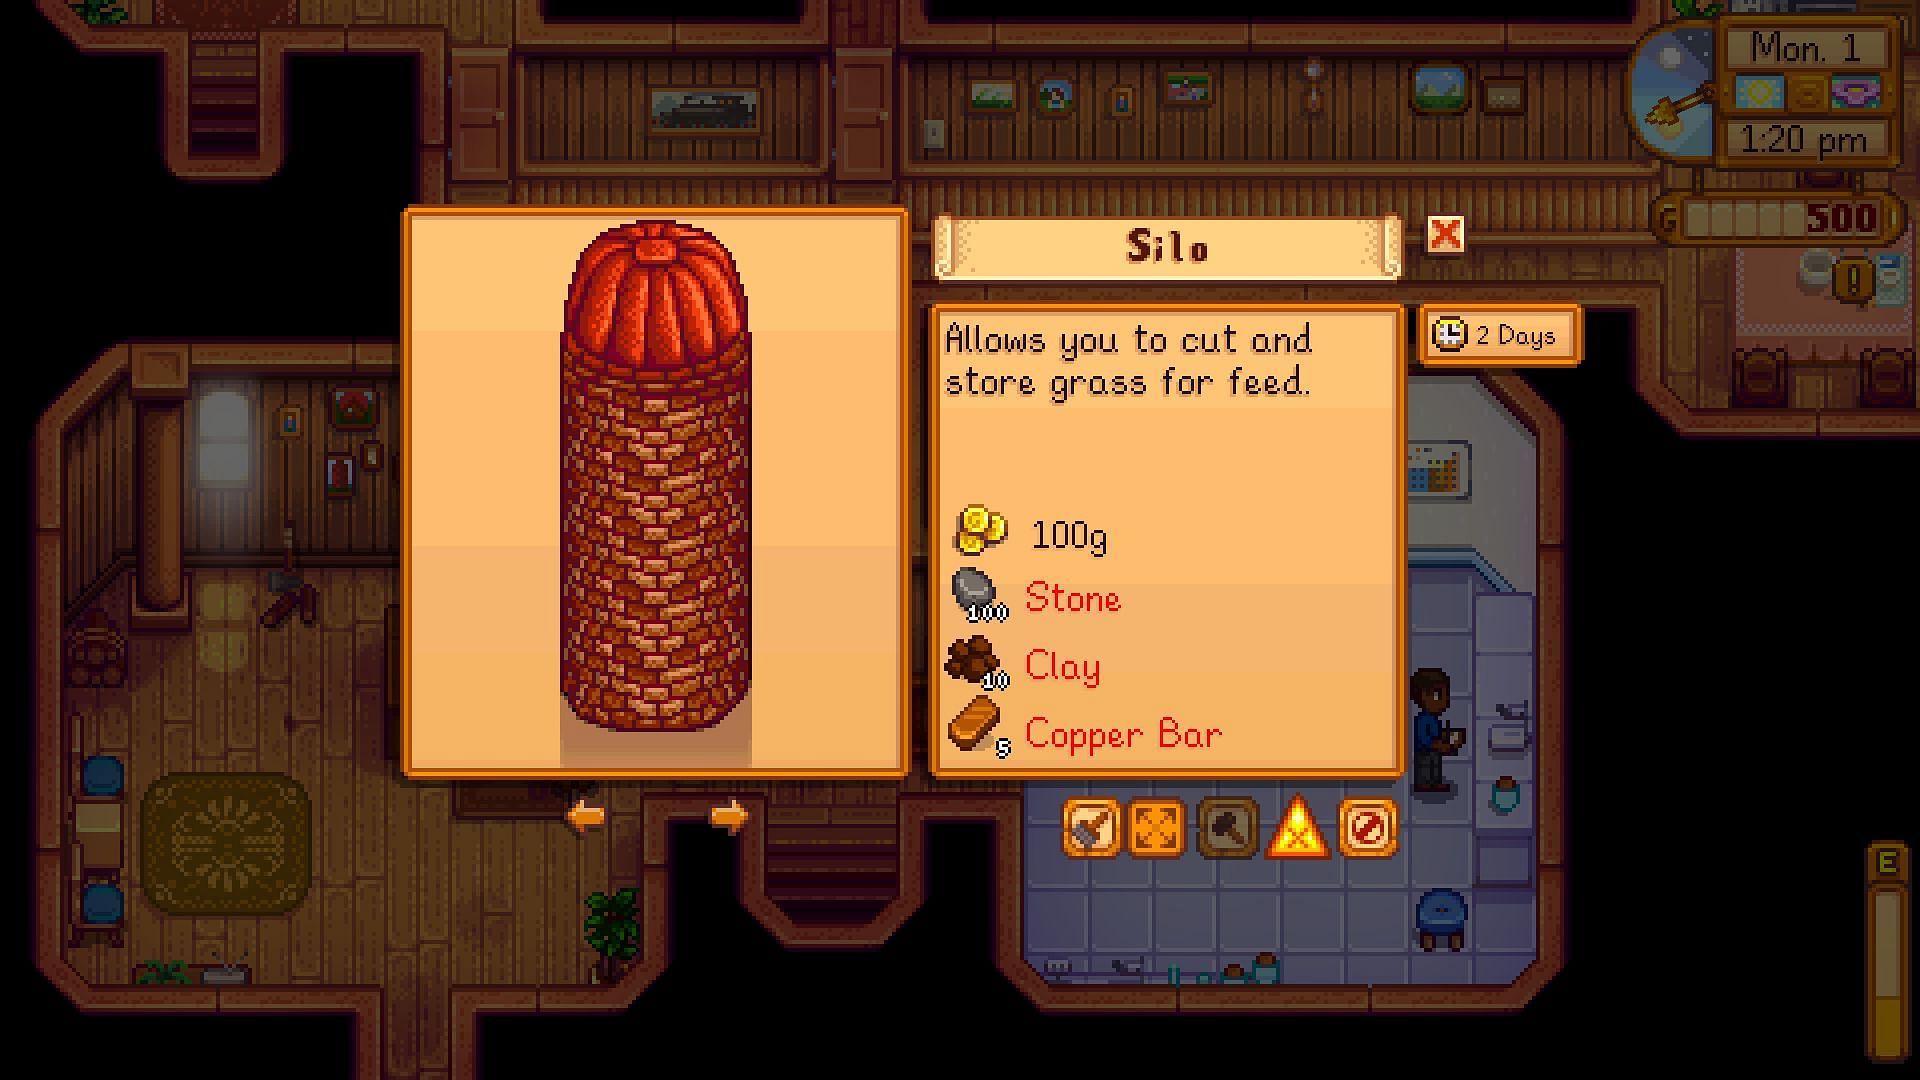 You can purchase a silo for 100g (Image via ConcernedApe)